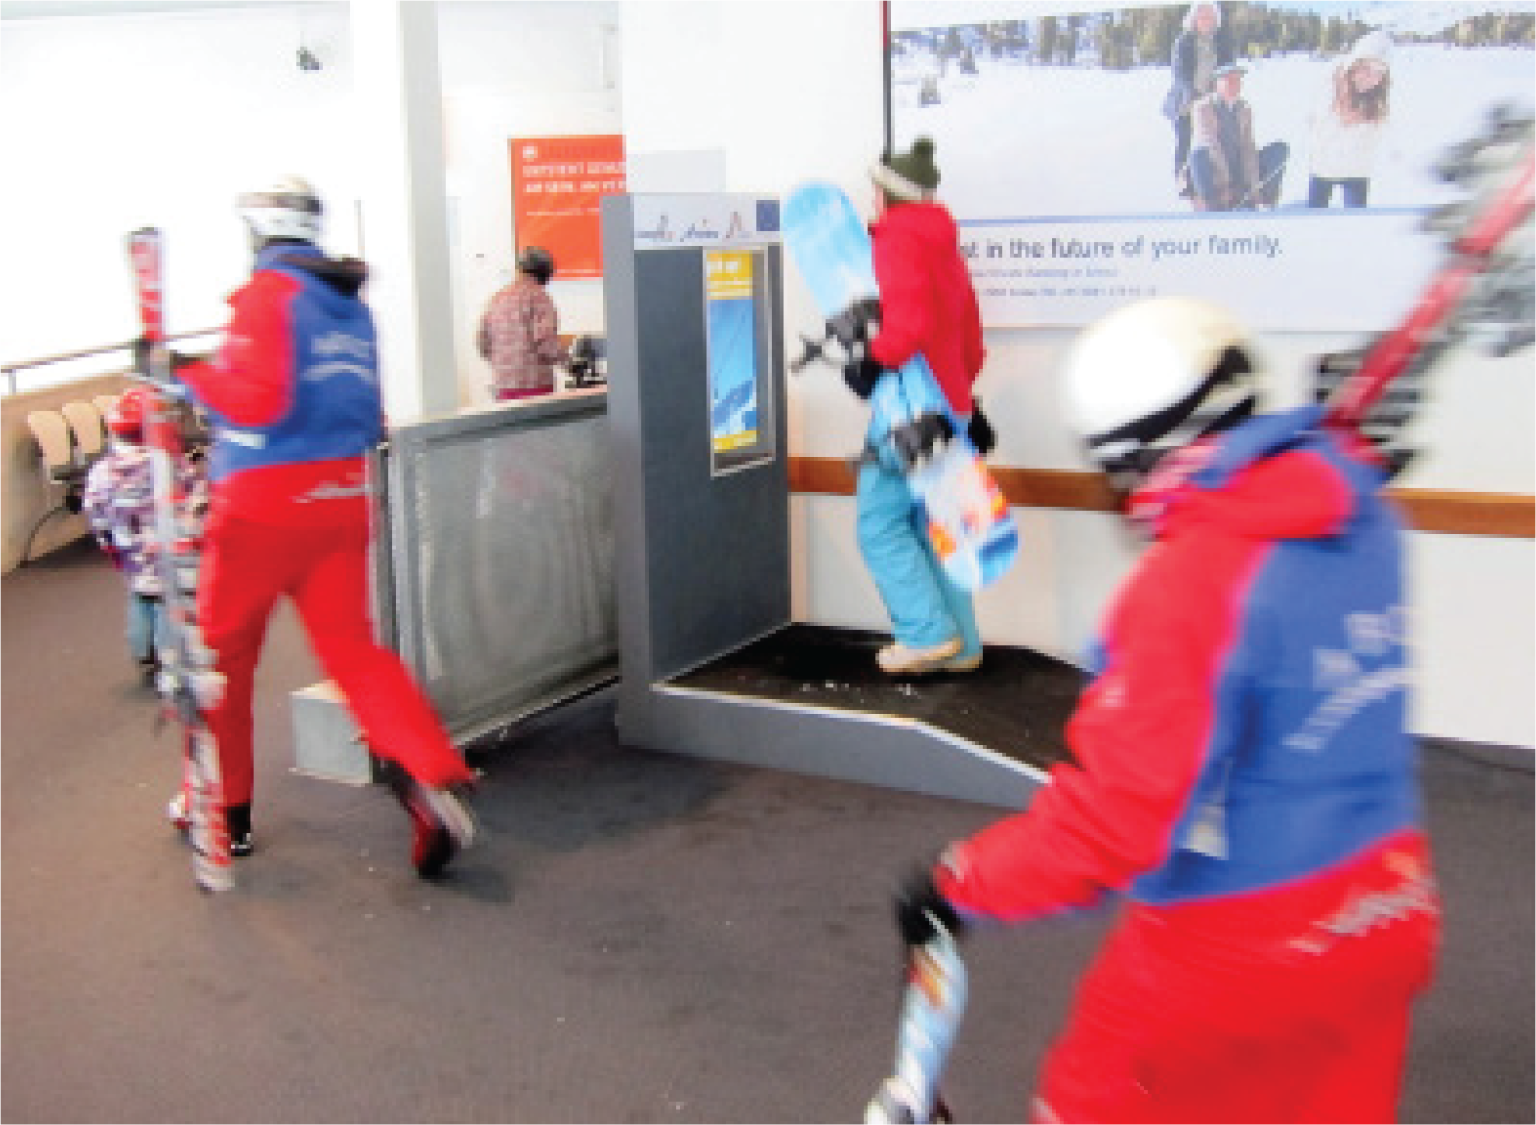 Ski Centre and Energy Floors, creating awareness on sustainable energy